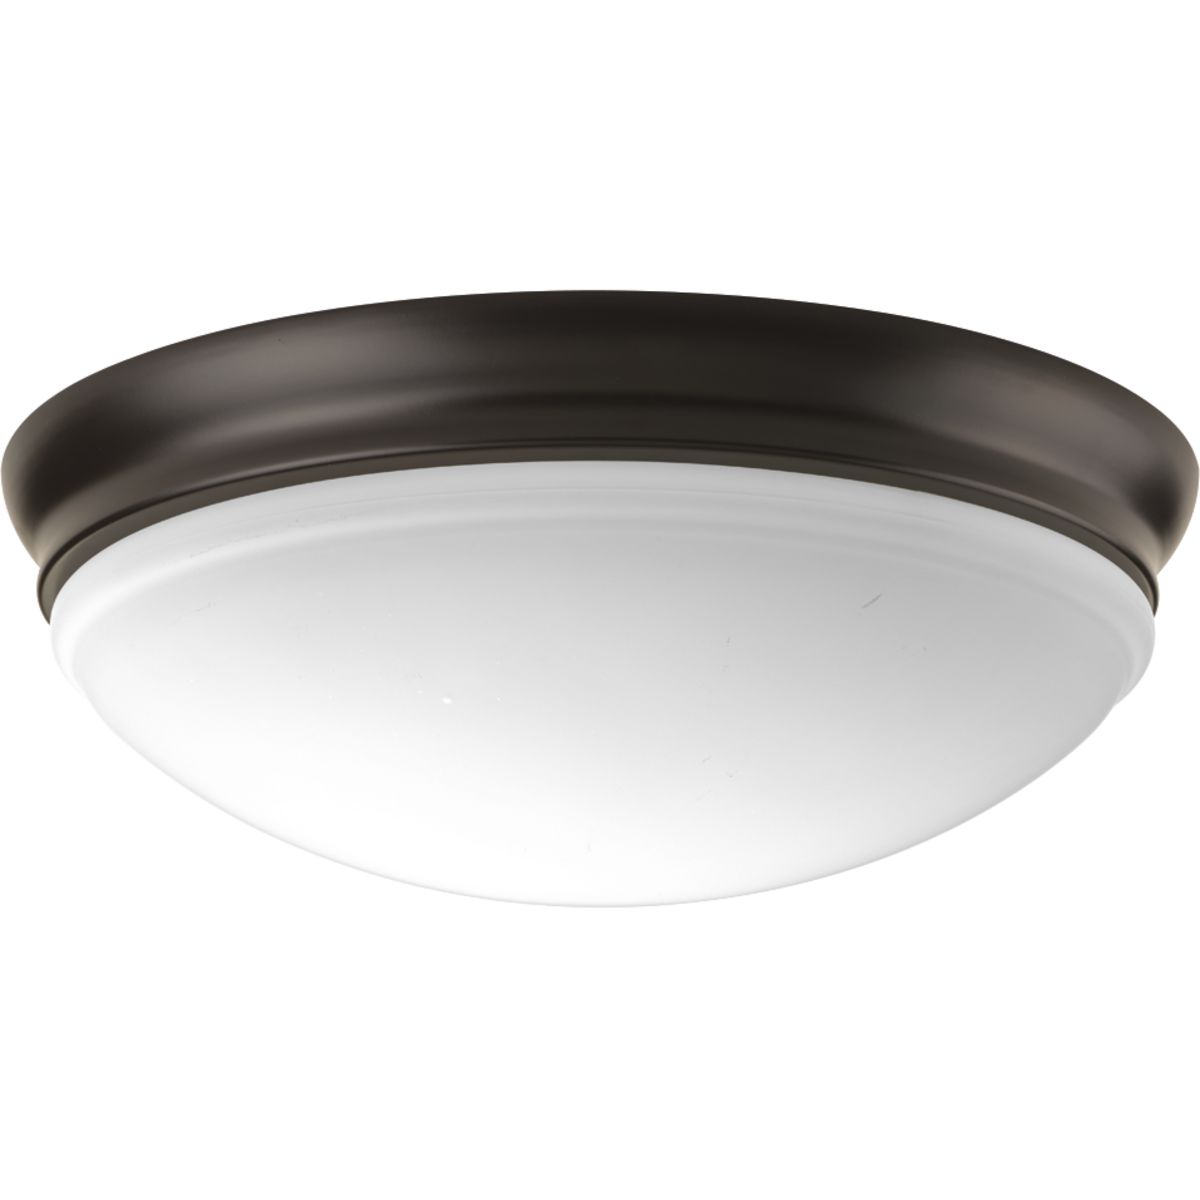 The 13-1/2 inch LED Flush mount offers traditional form factor for ambient illumination. The etched glass dominates the design with its distinctive and sculptural bowl. The elegant glass is paired with a metallic frame in a Antique Bronze finish.